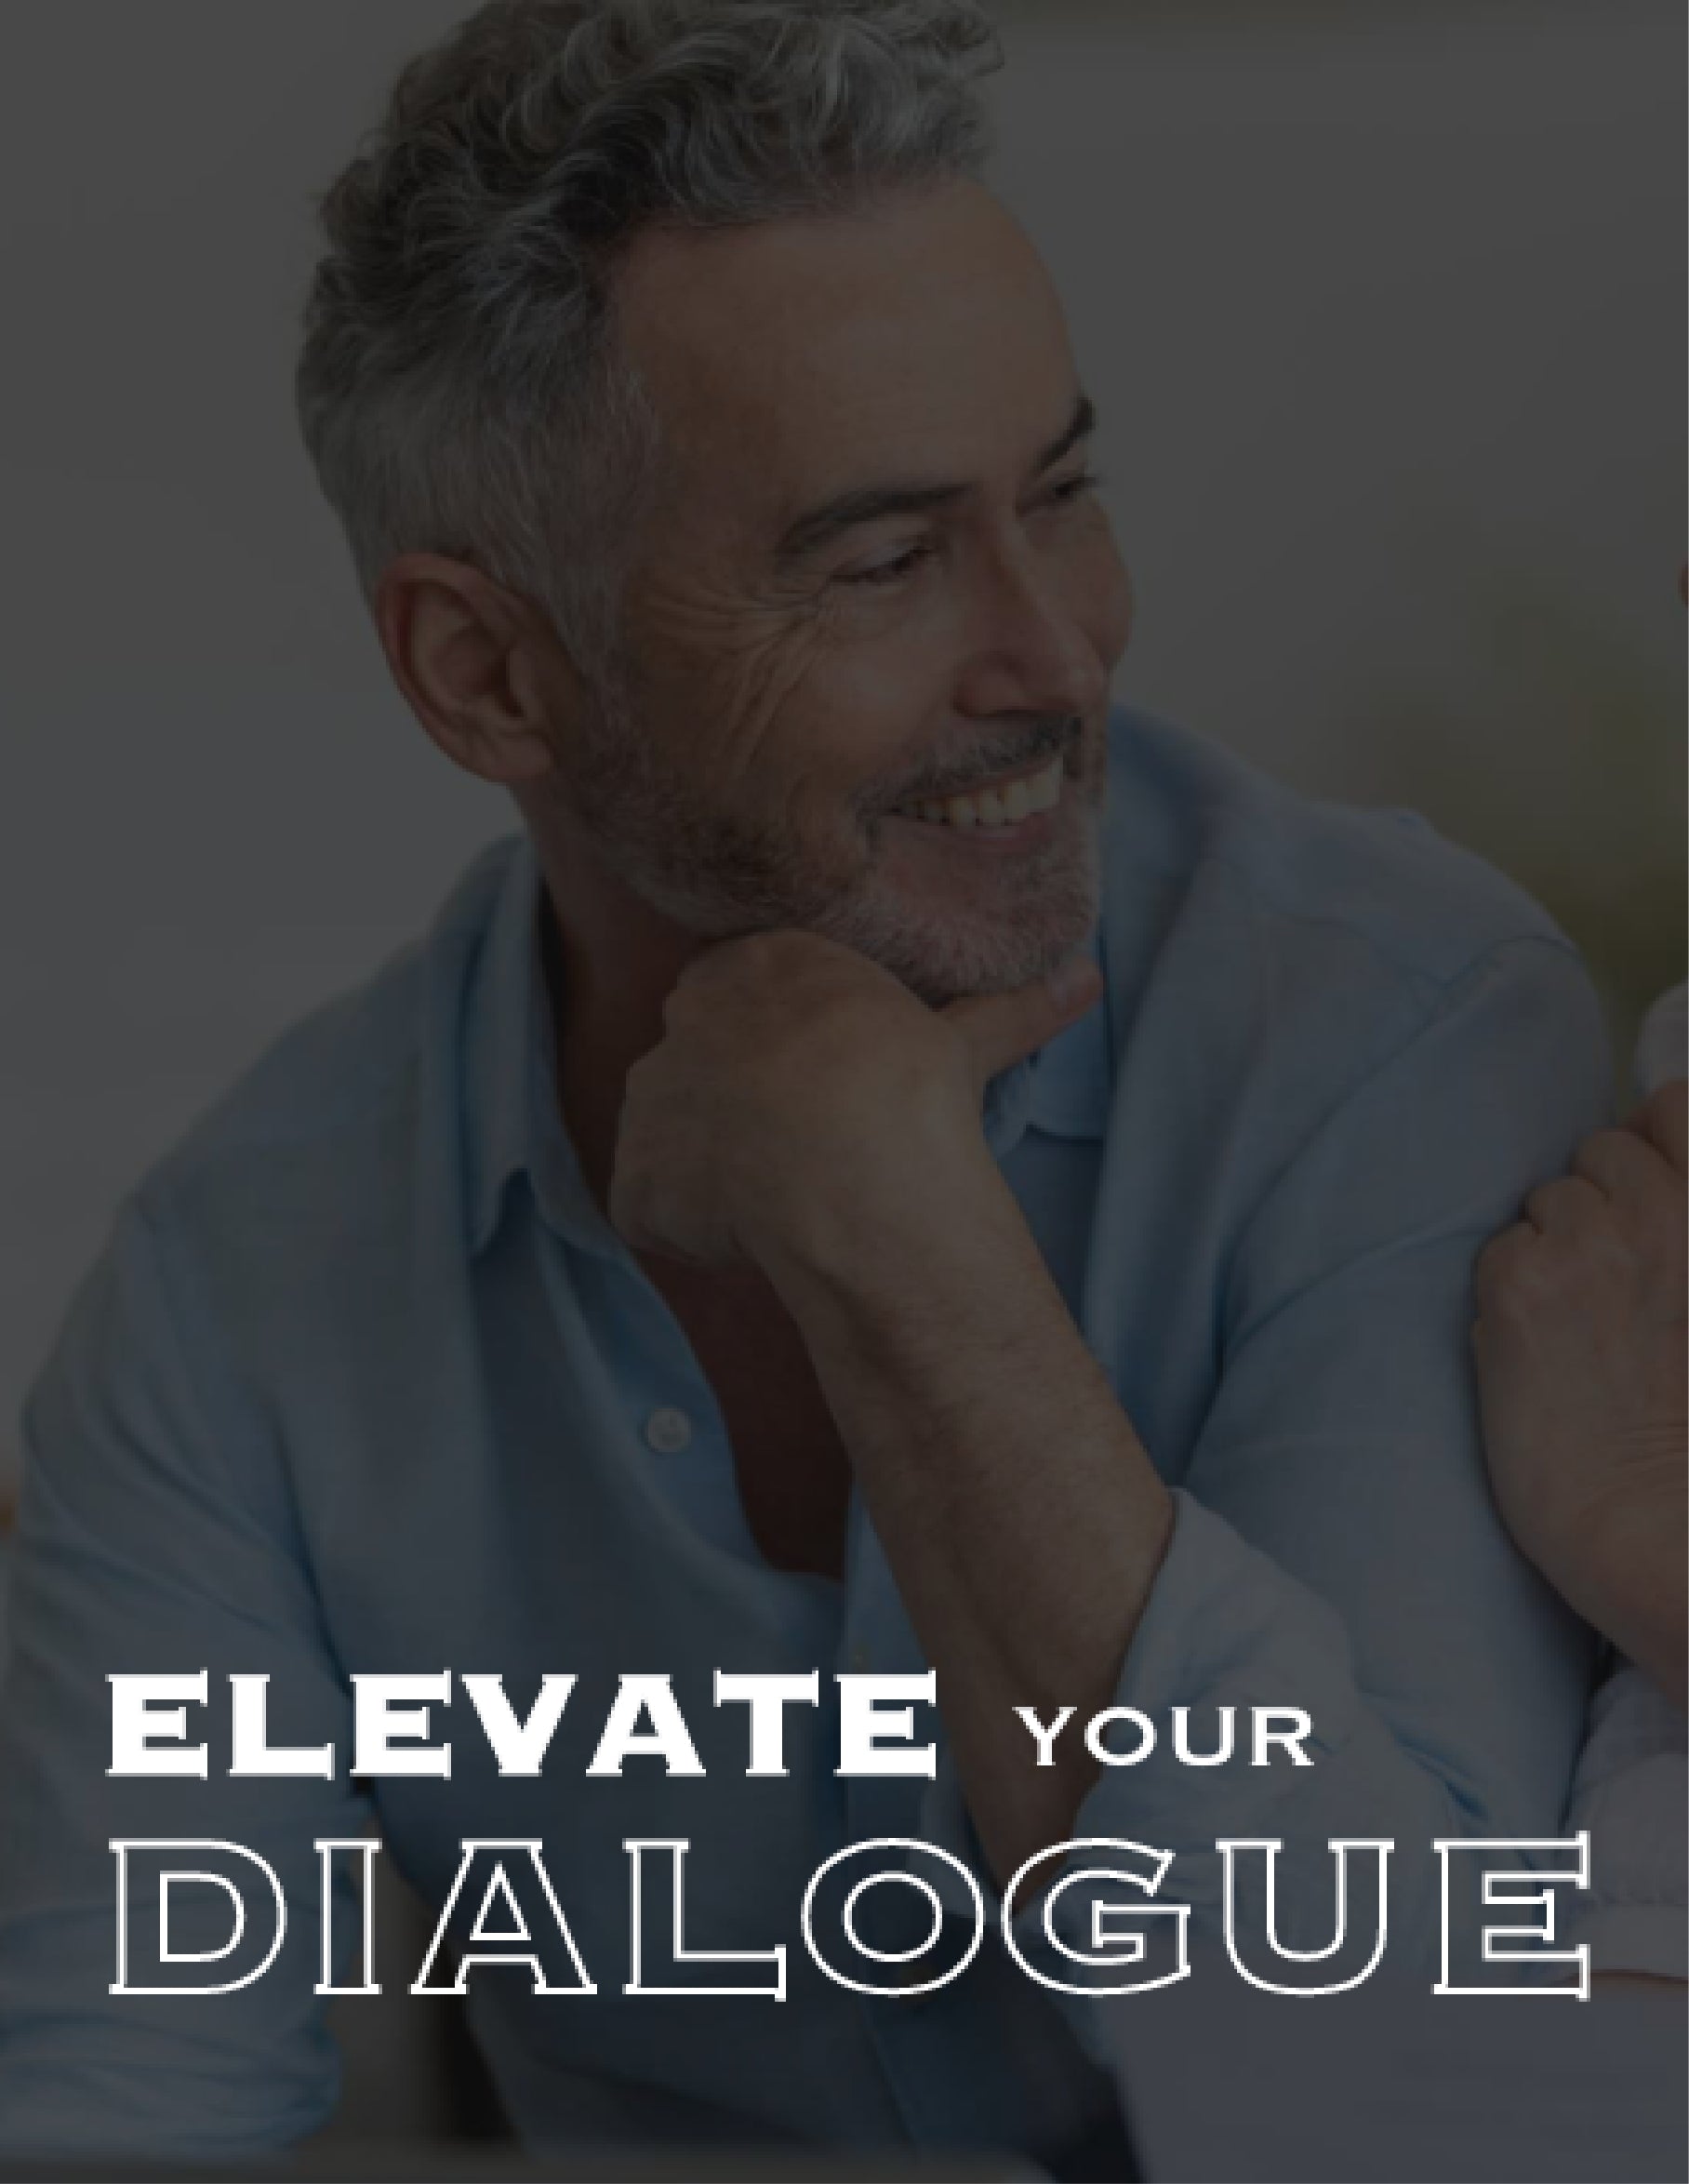 ELEVATE YOUR DIALOGUE